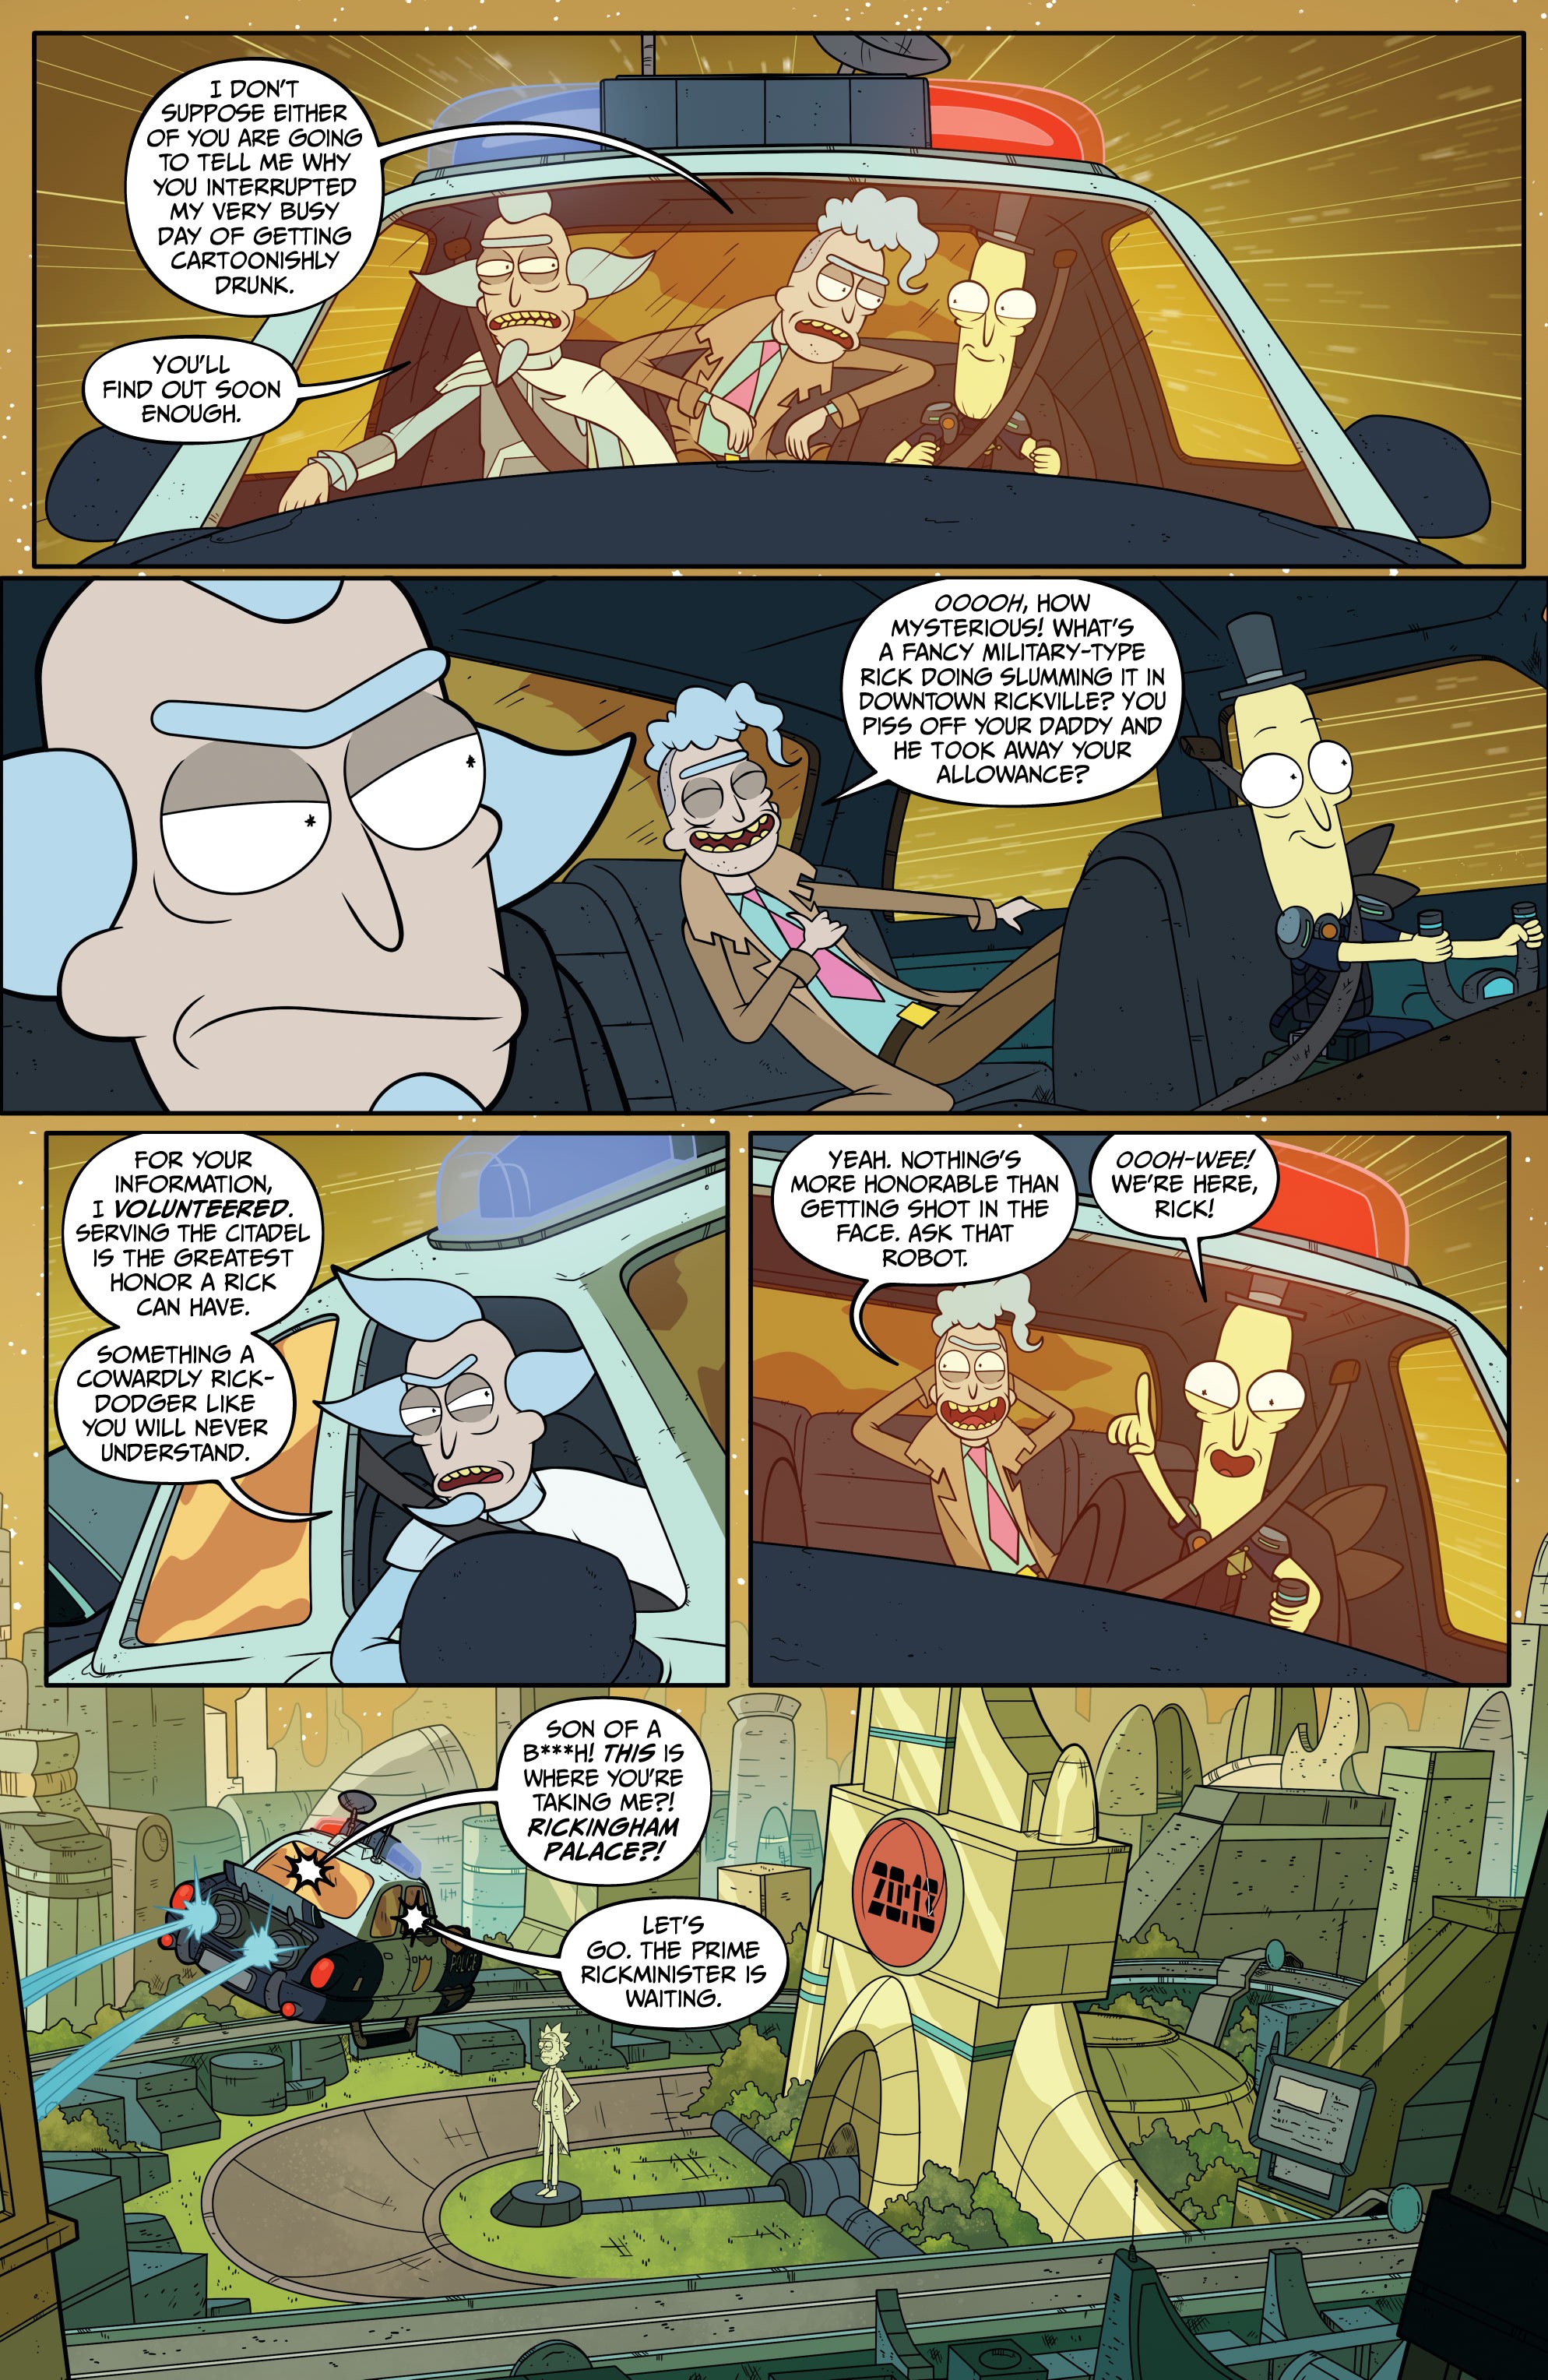 Rick and Morty Presents: The Council of Ricks (2020): Chapter 1 - Page 6